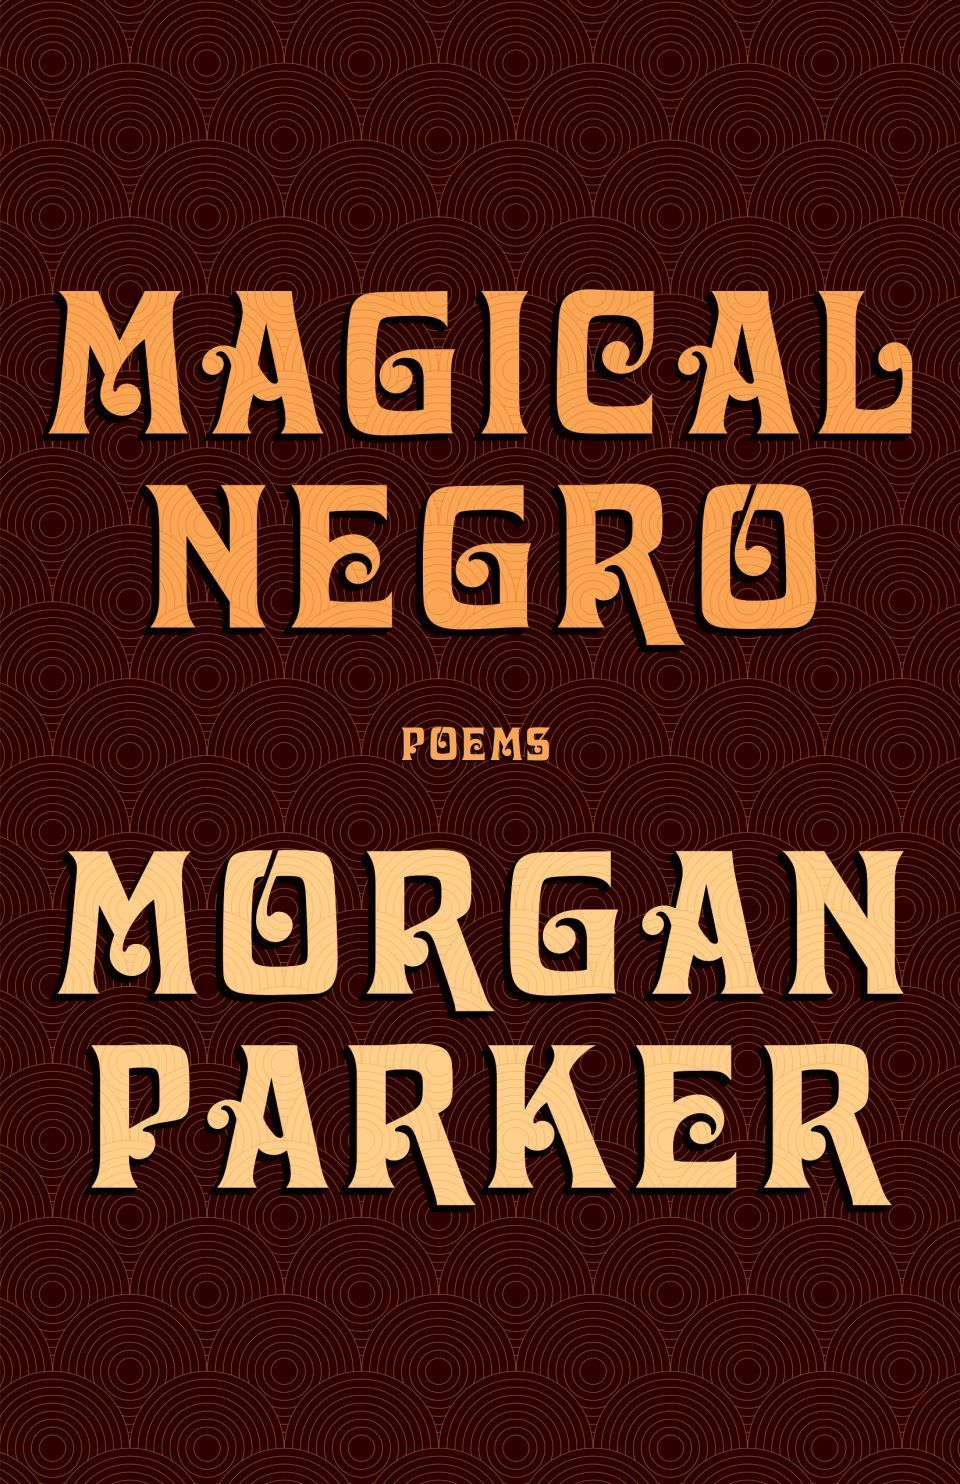 “Why Do You Feel Comfortable”: On Morgan Parker’s “Magical Negro”